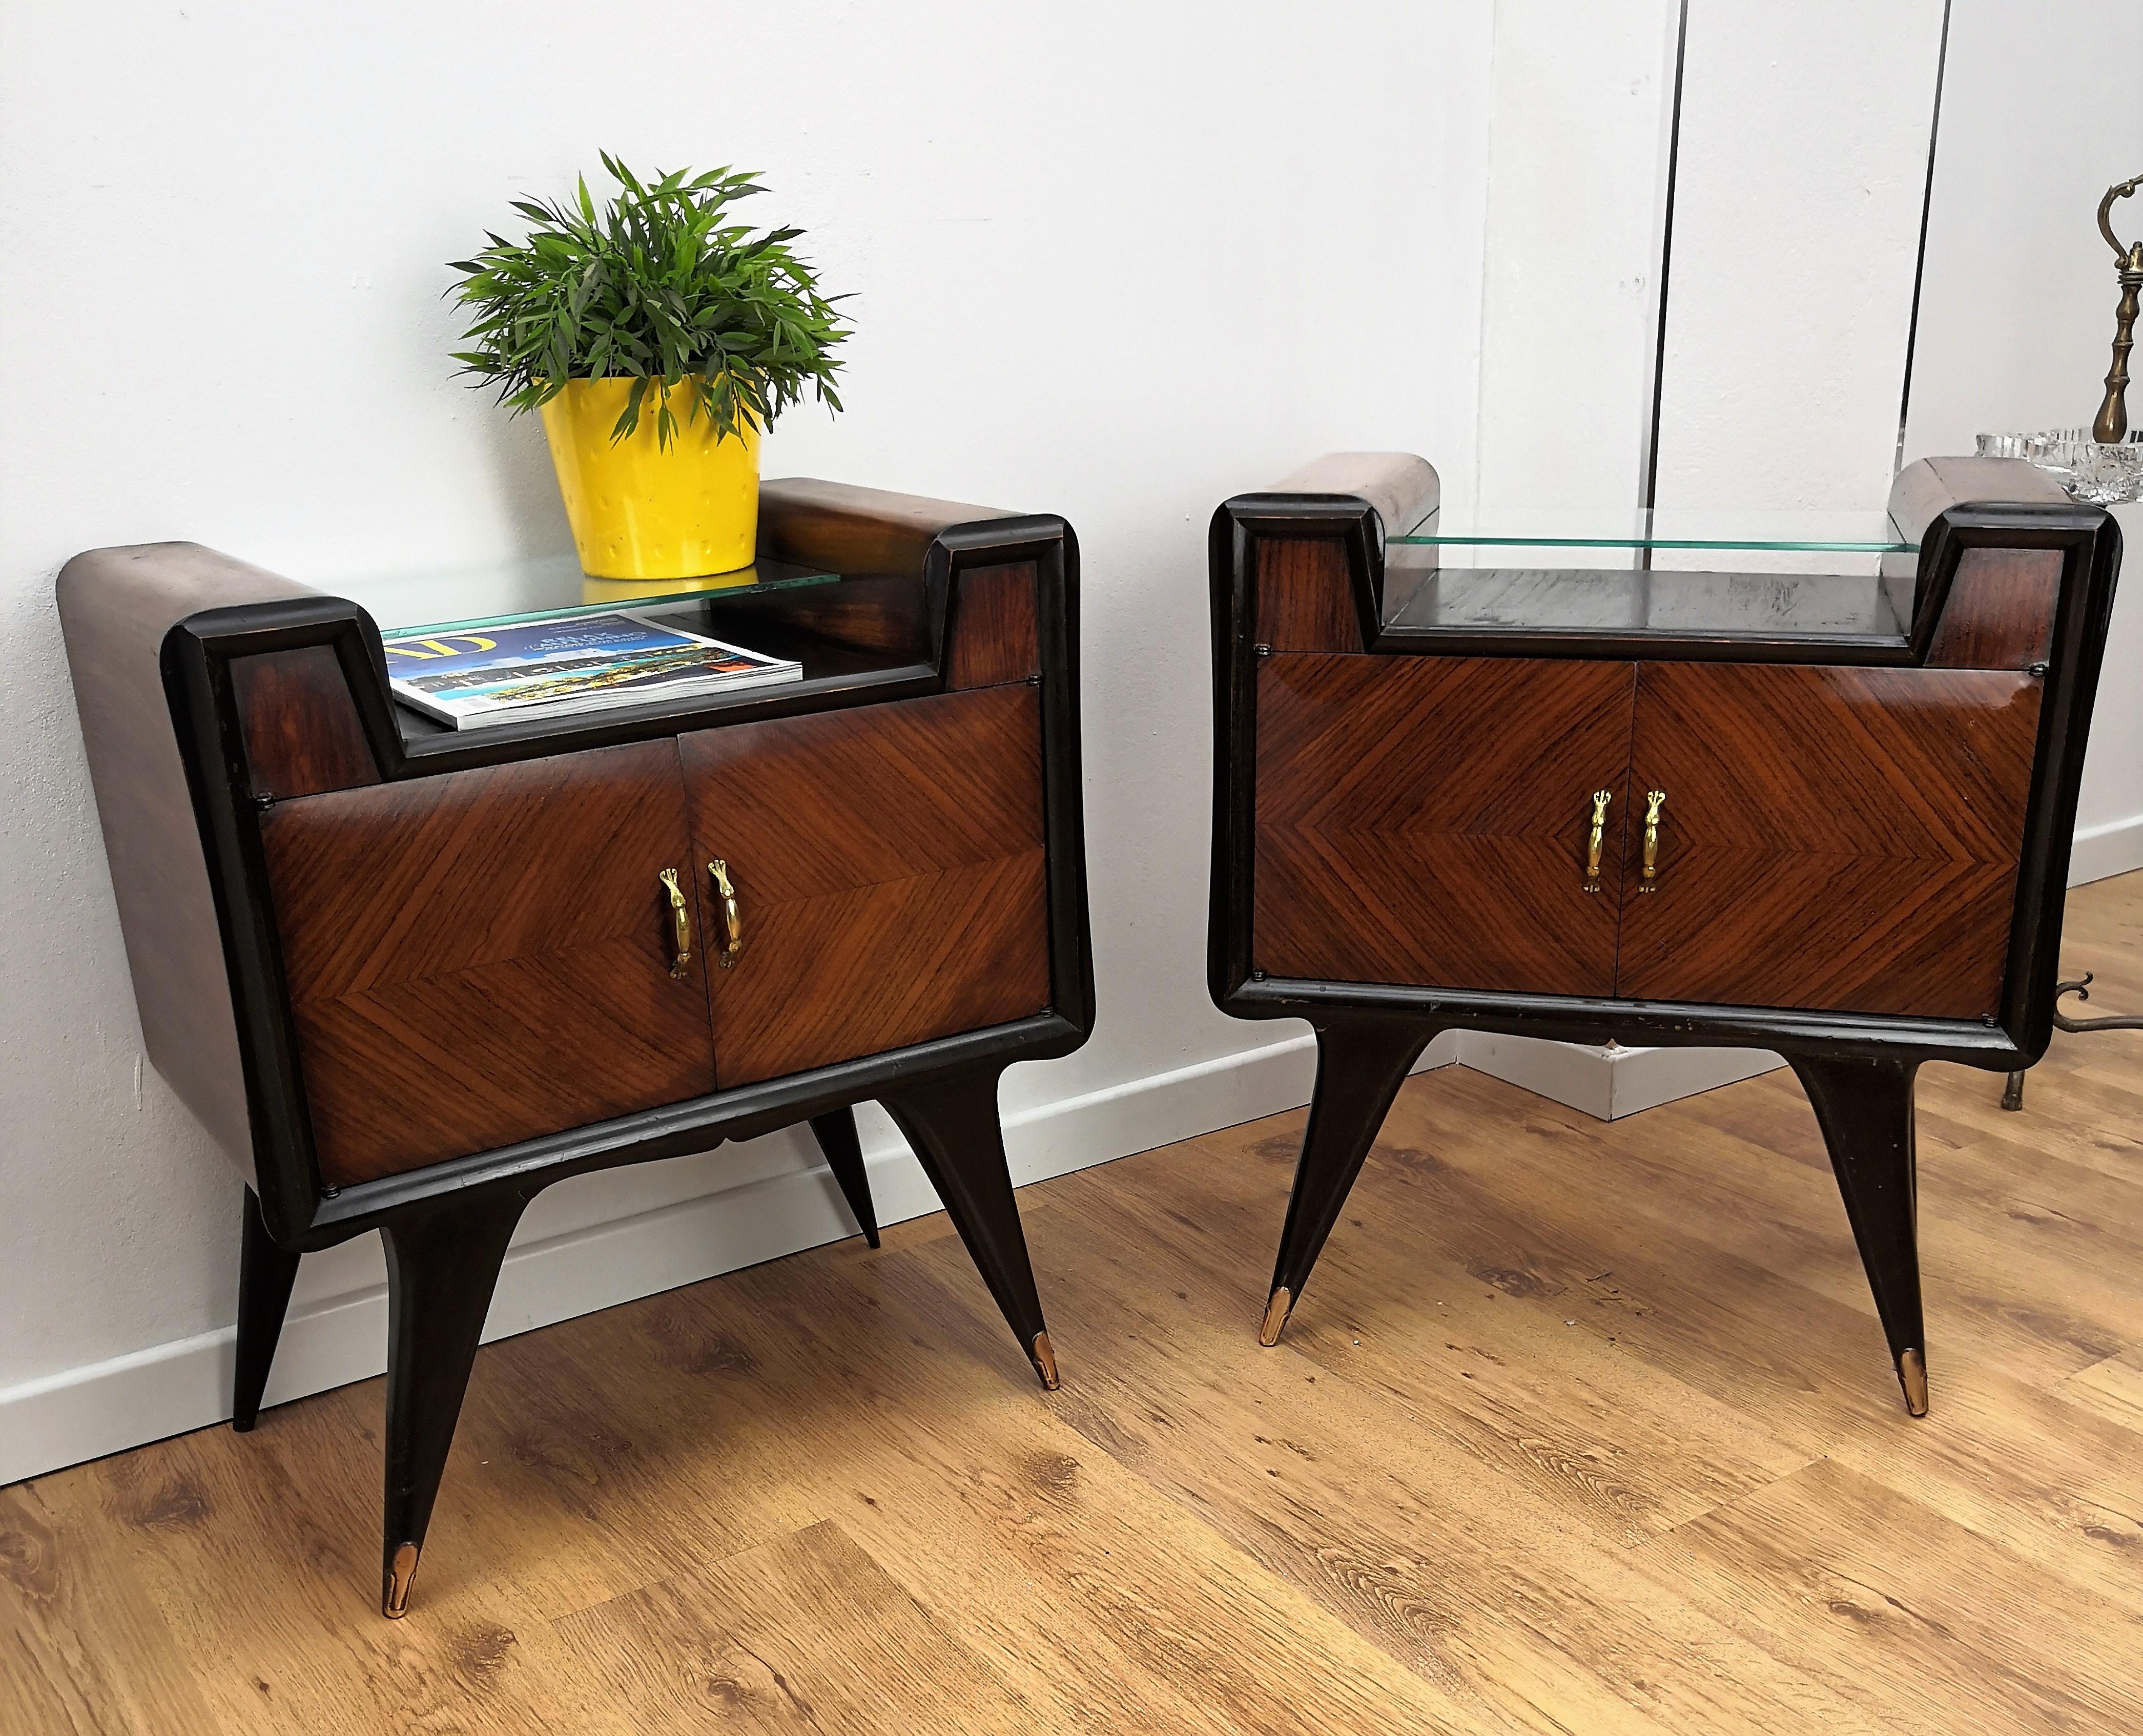 20th Century Pair of Midcentury Italian Art Deco Rosewood & Glass Nightstands Bedside Tables